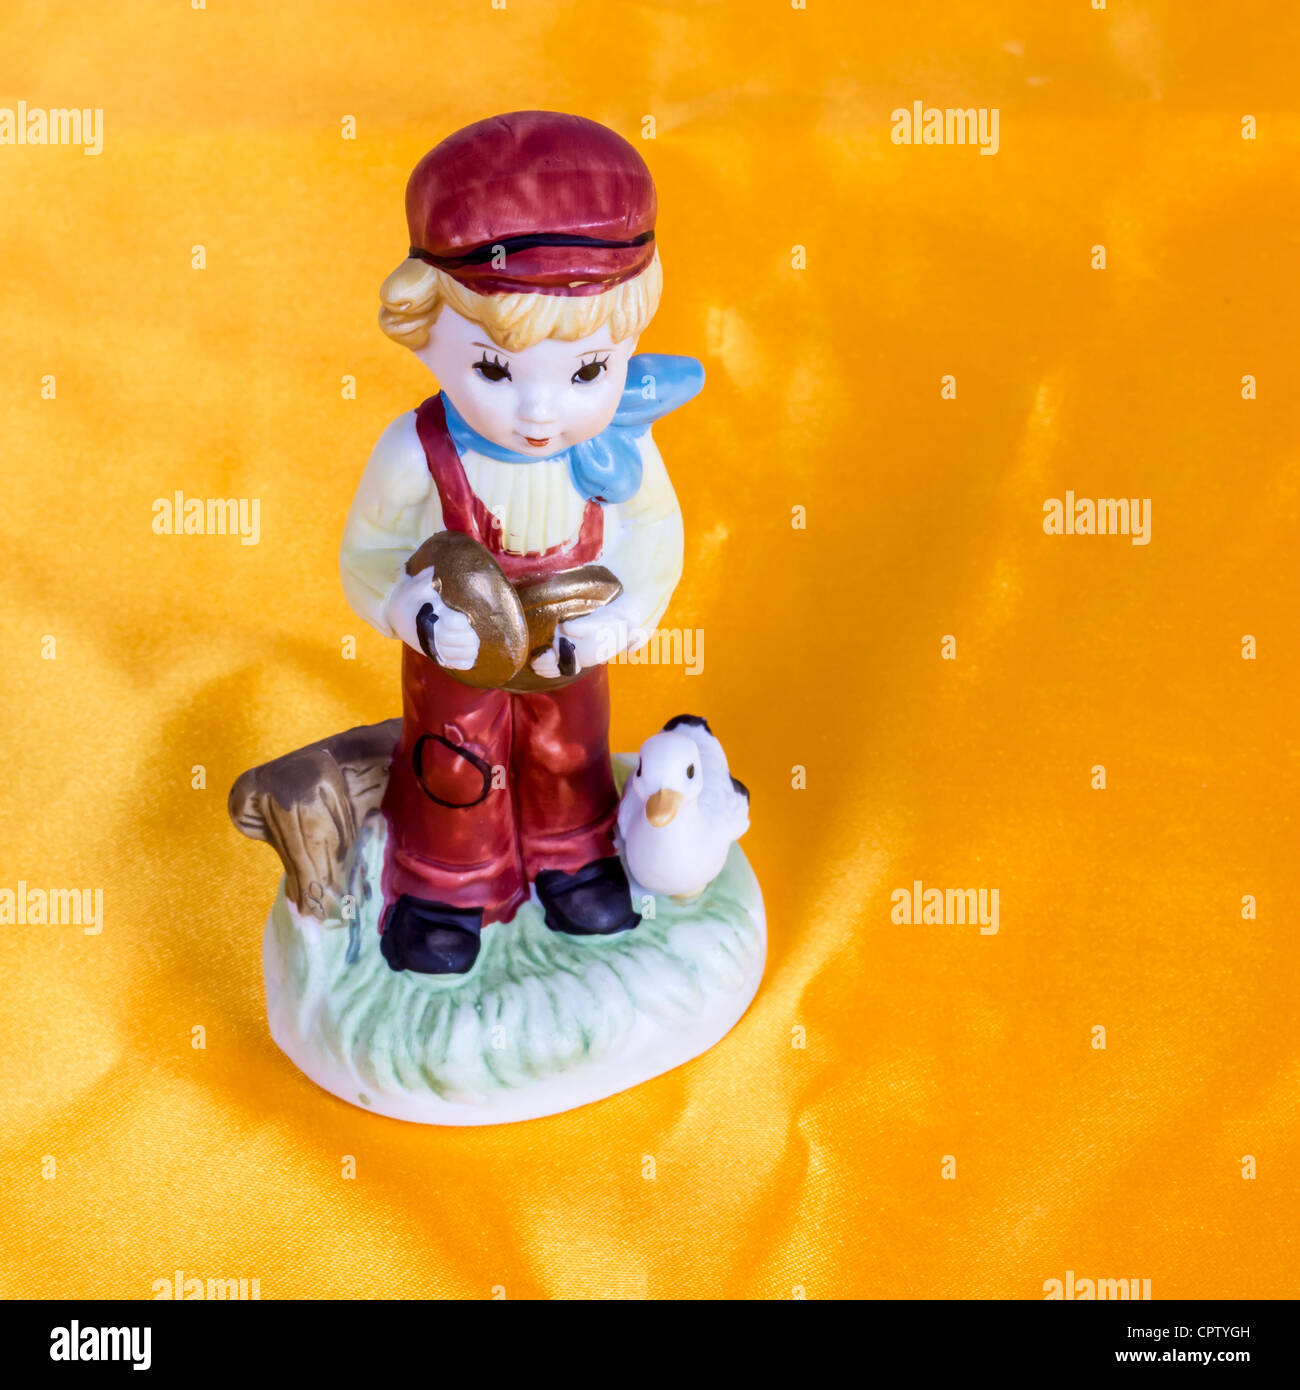 Porcelain figurine, Young Boy with Duck Stock Photo